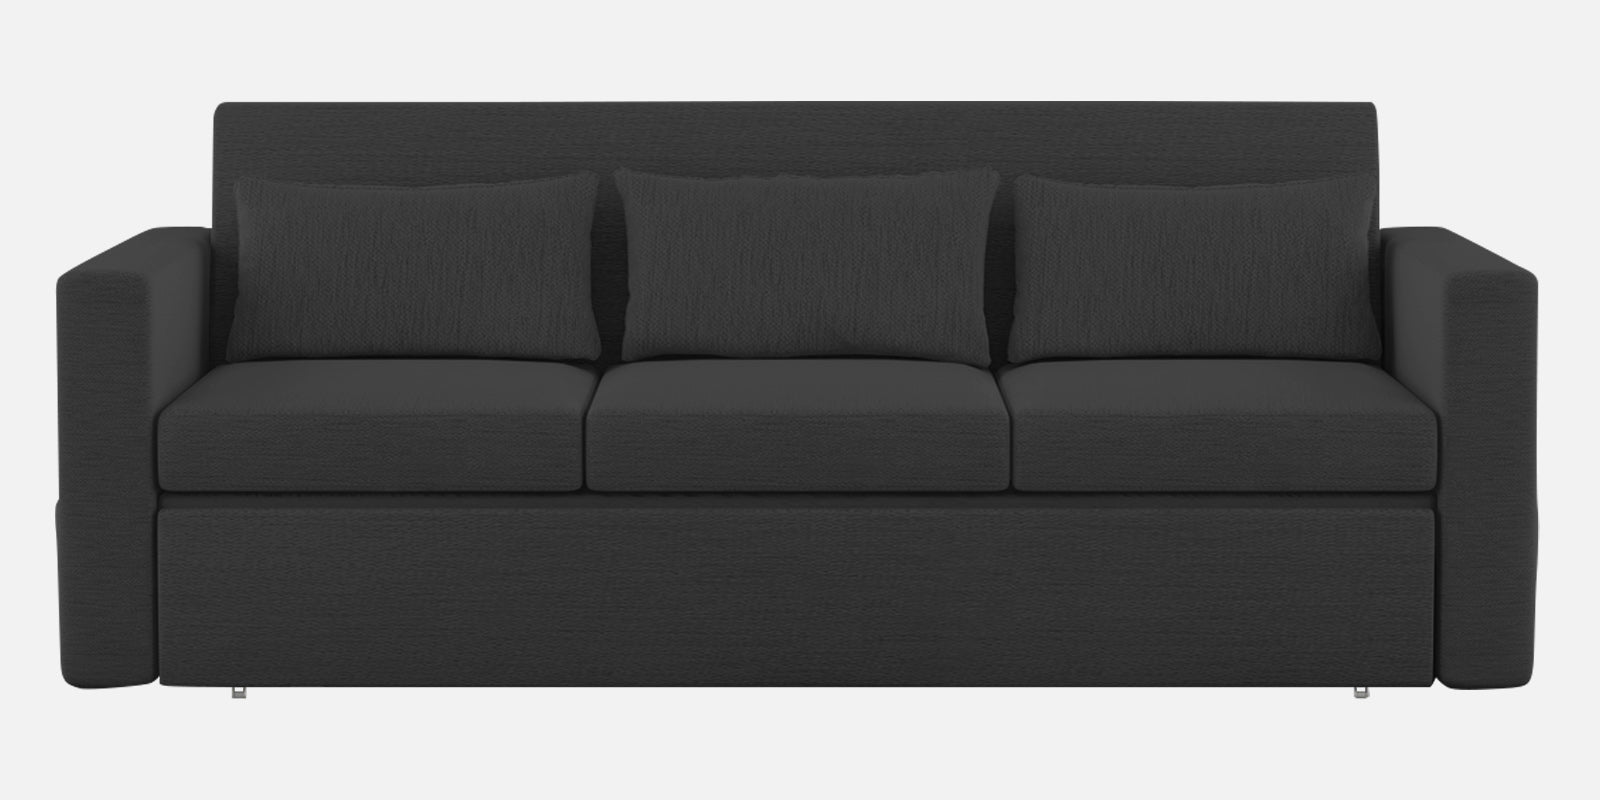 River Fabric 3 Seater Pull Out Sofa Cum Bed In Charcoal Grey Colour